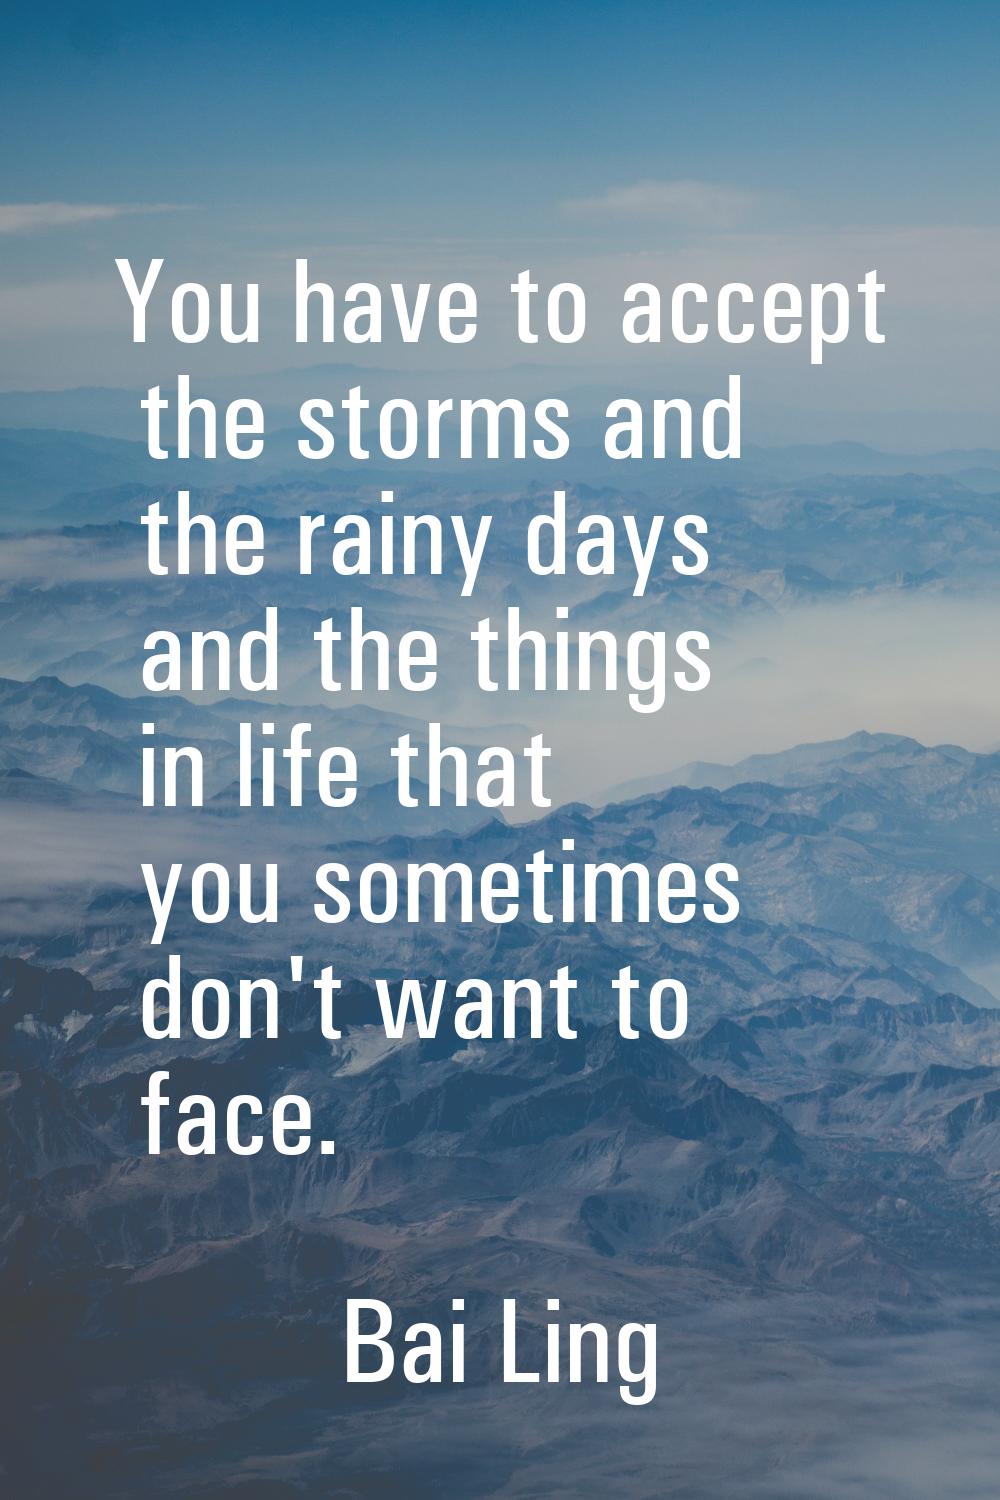 You have to accept the storms and the rainy days and the things in life that you sometimes don't wa